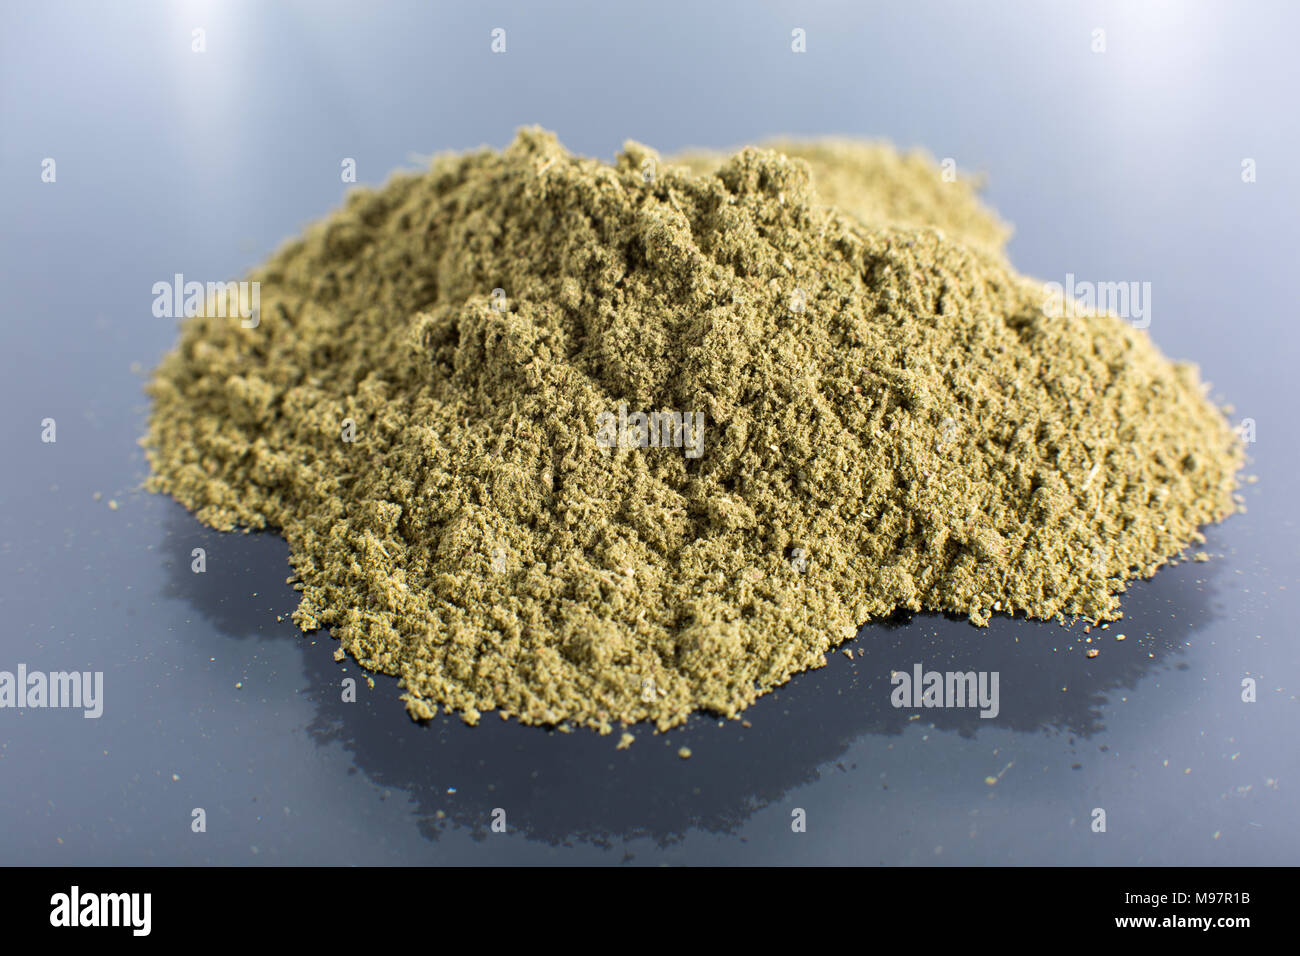 coca leaf flour used for altitude sickness treatment tea and ingredient for baking Stock Photo